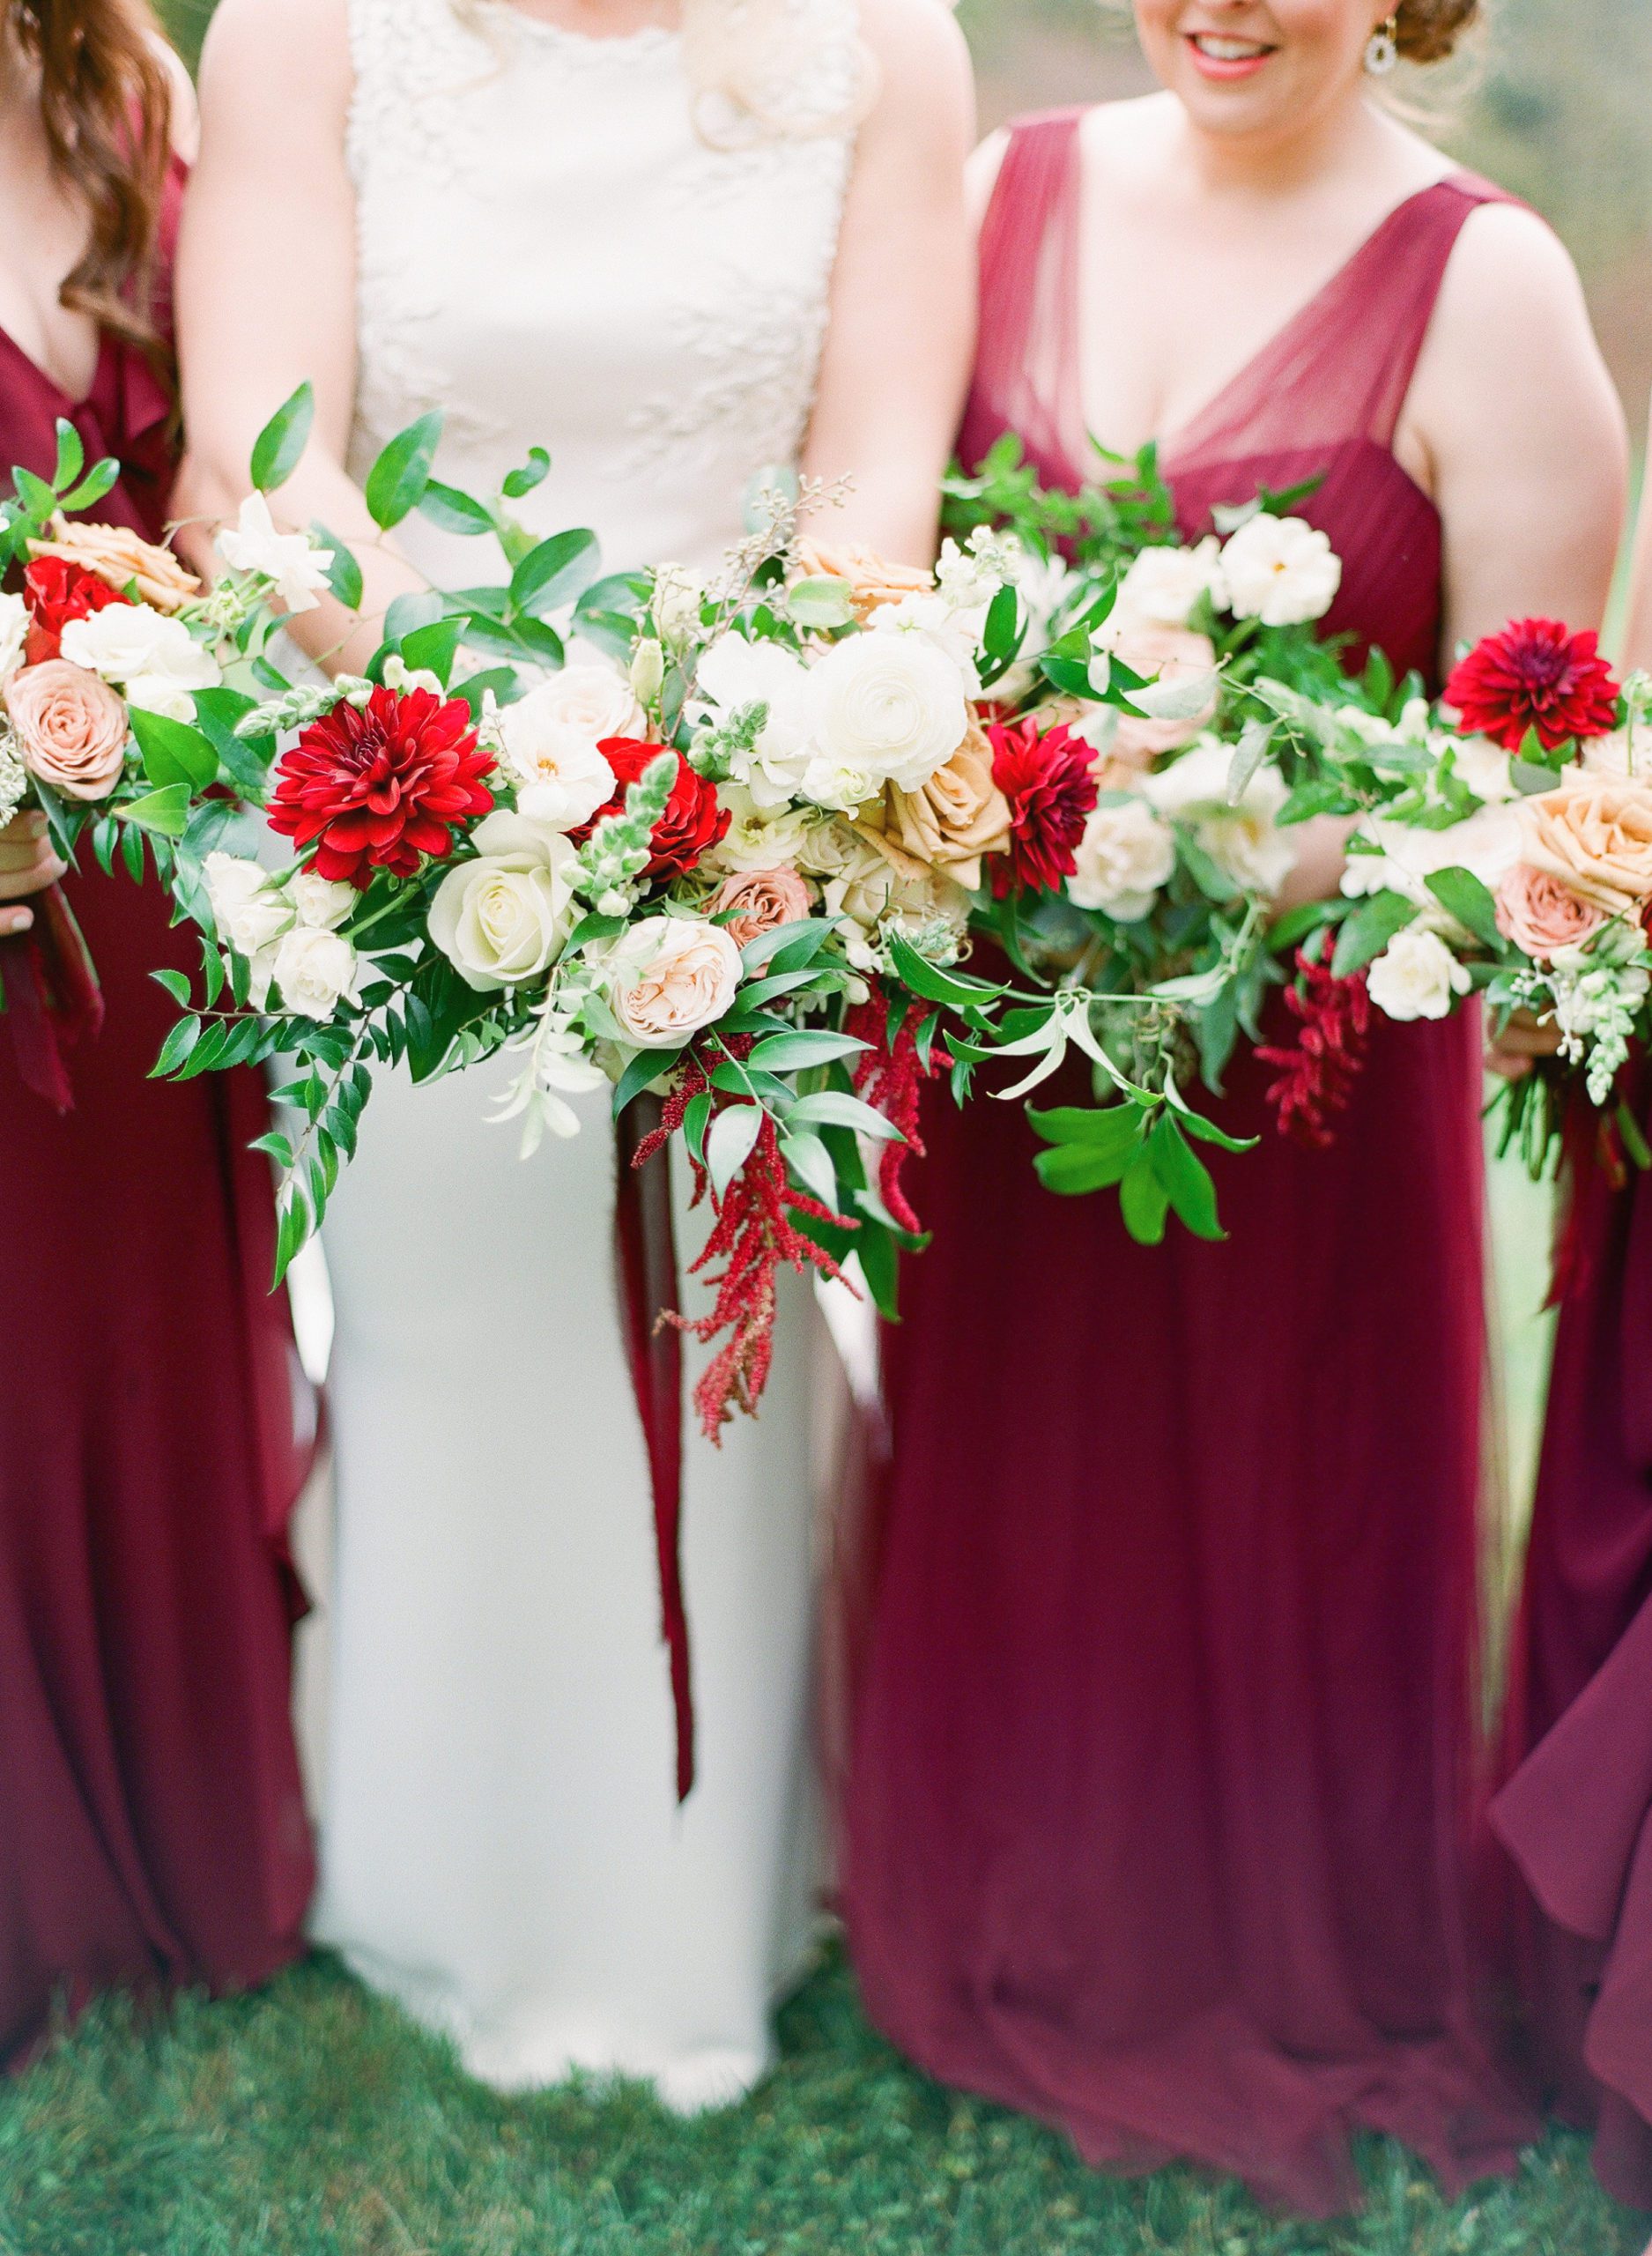 Bride and Bridesmaids Bouquet Inspiration Maroon and white bouquets photo